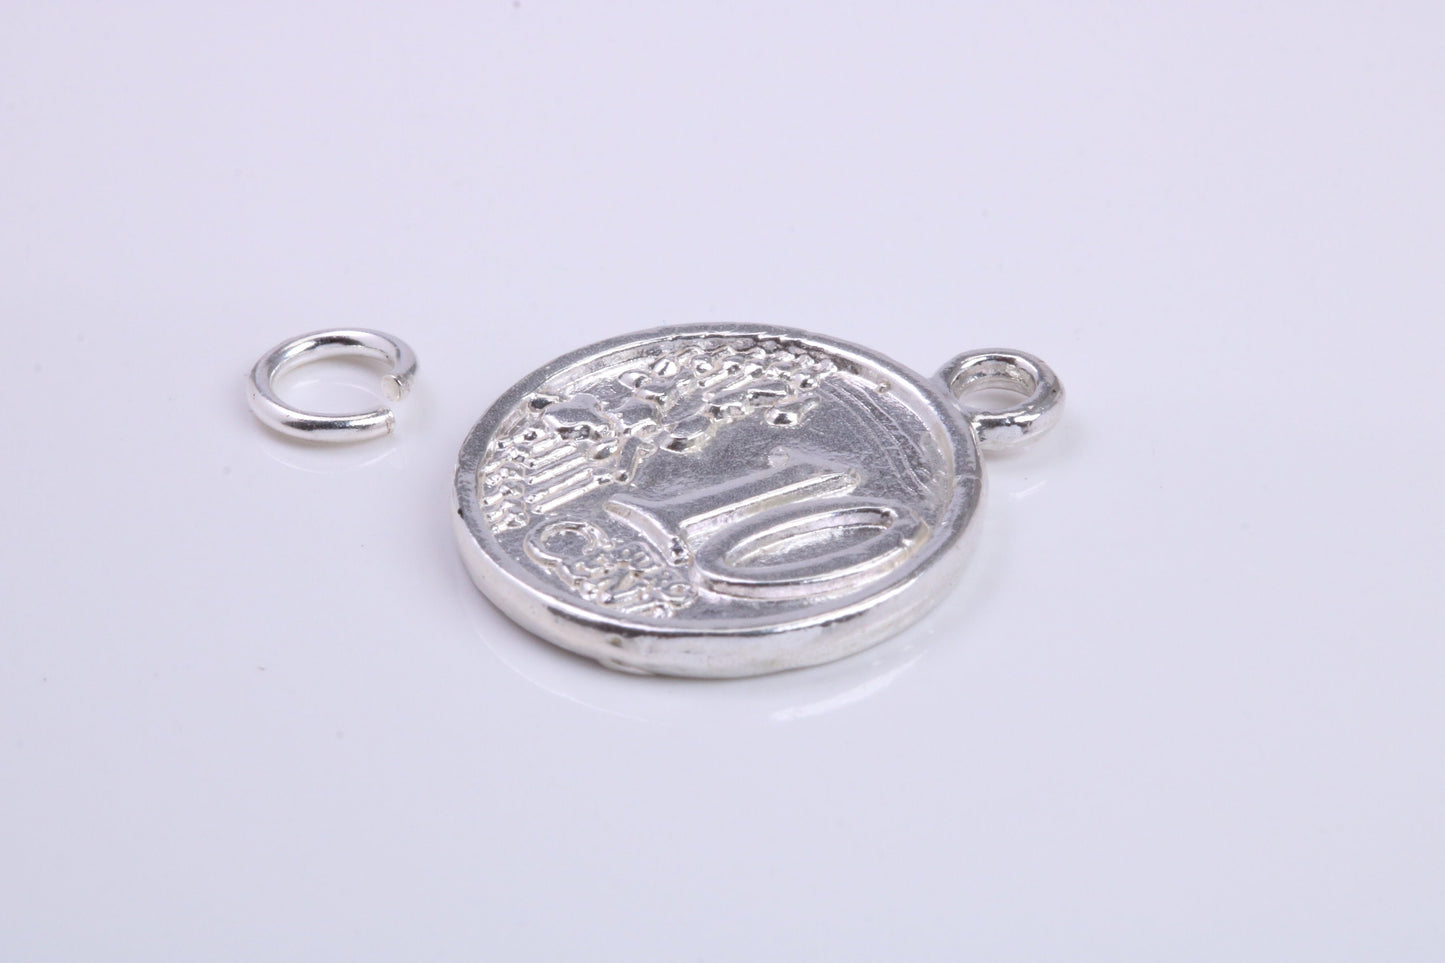 10 Cents Charm, Traditional Charm, Made from Solid 925 Grade Sterling Silver, Complete with Attachment Link